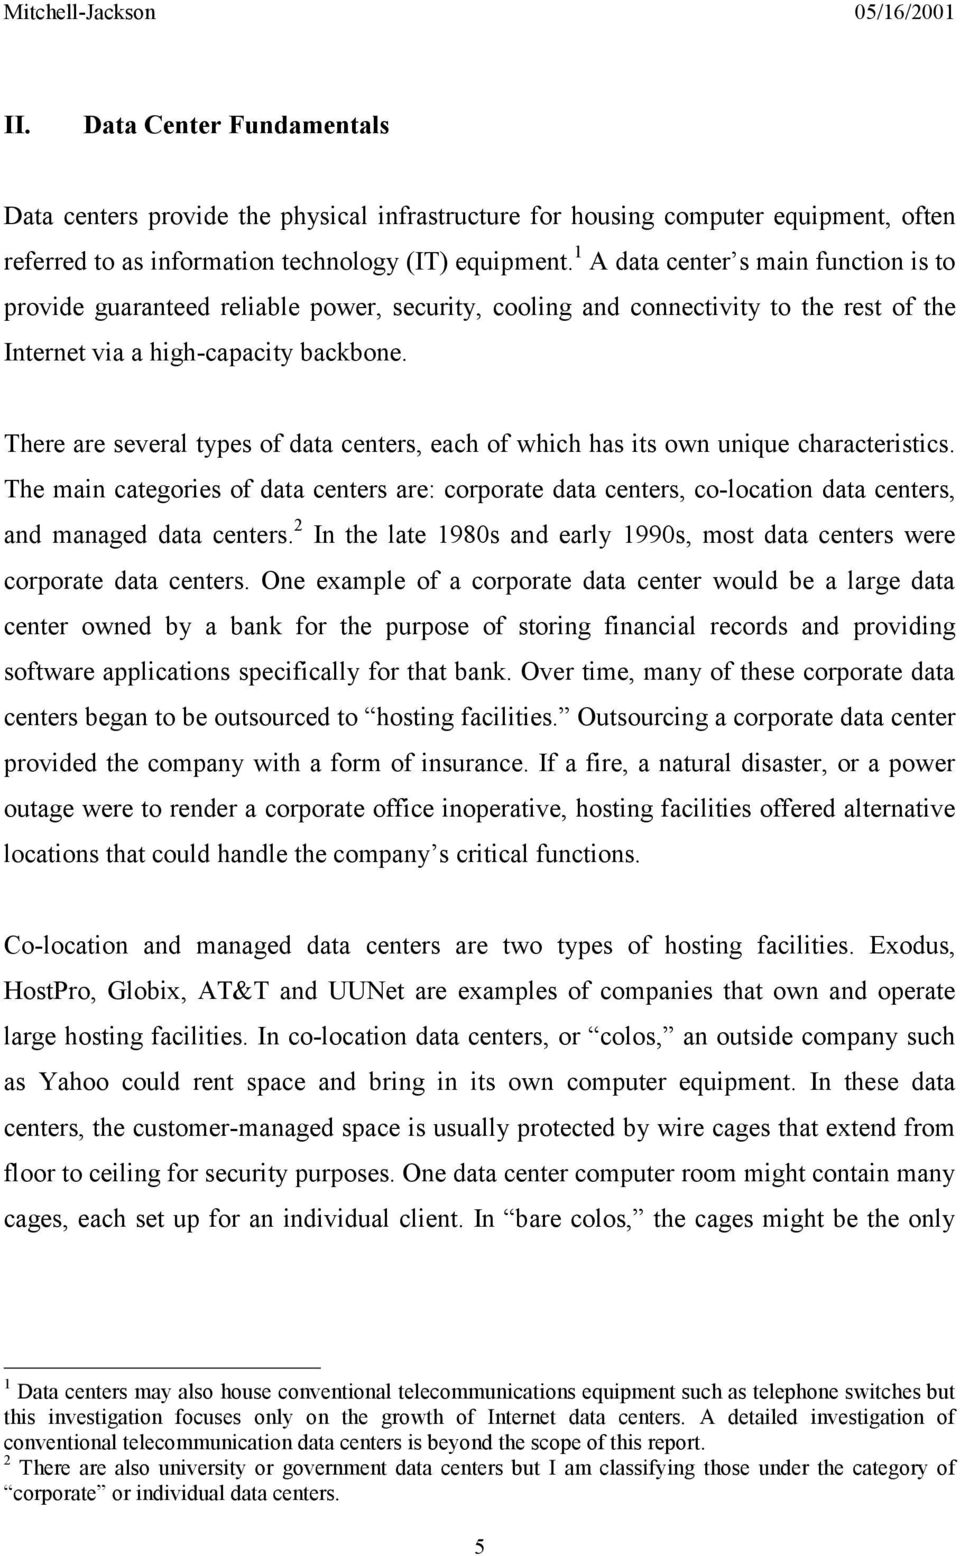 There are several types of data centers, each of which has its own unique characteristics.